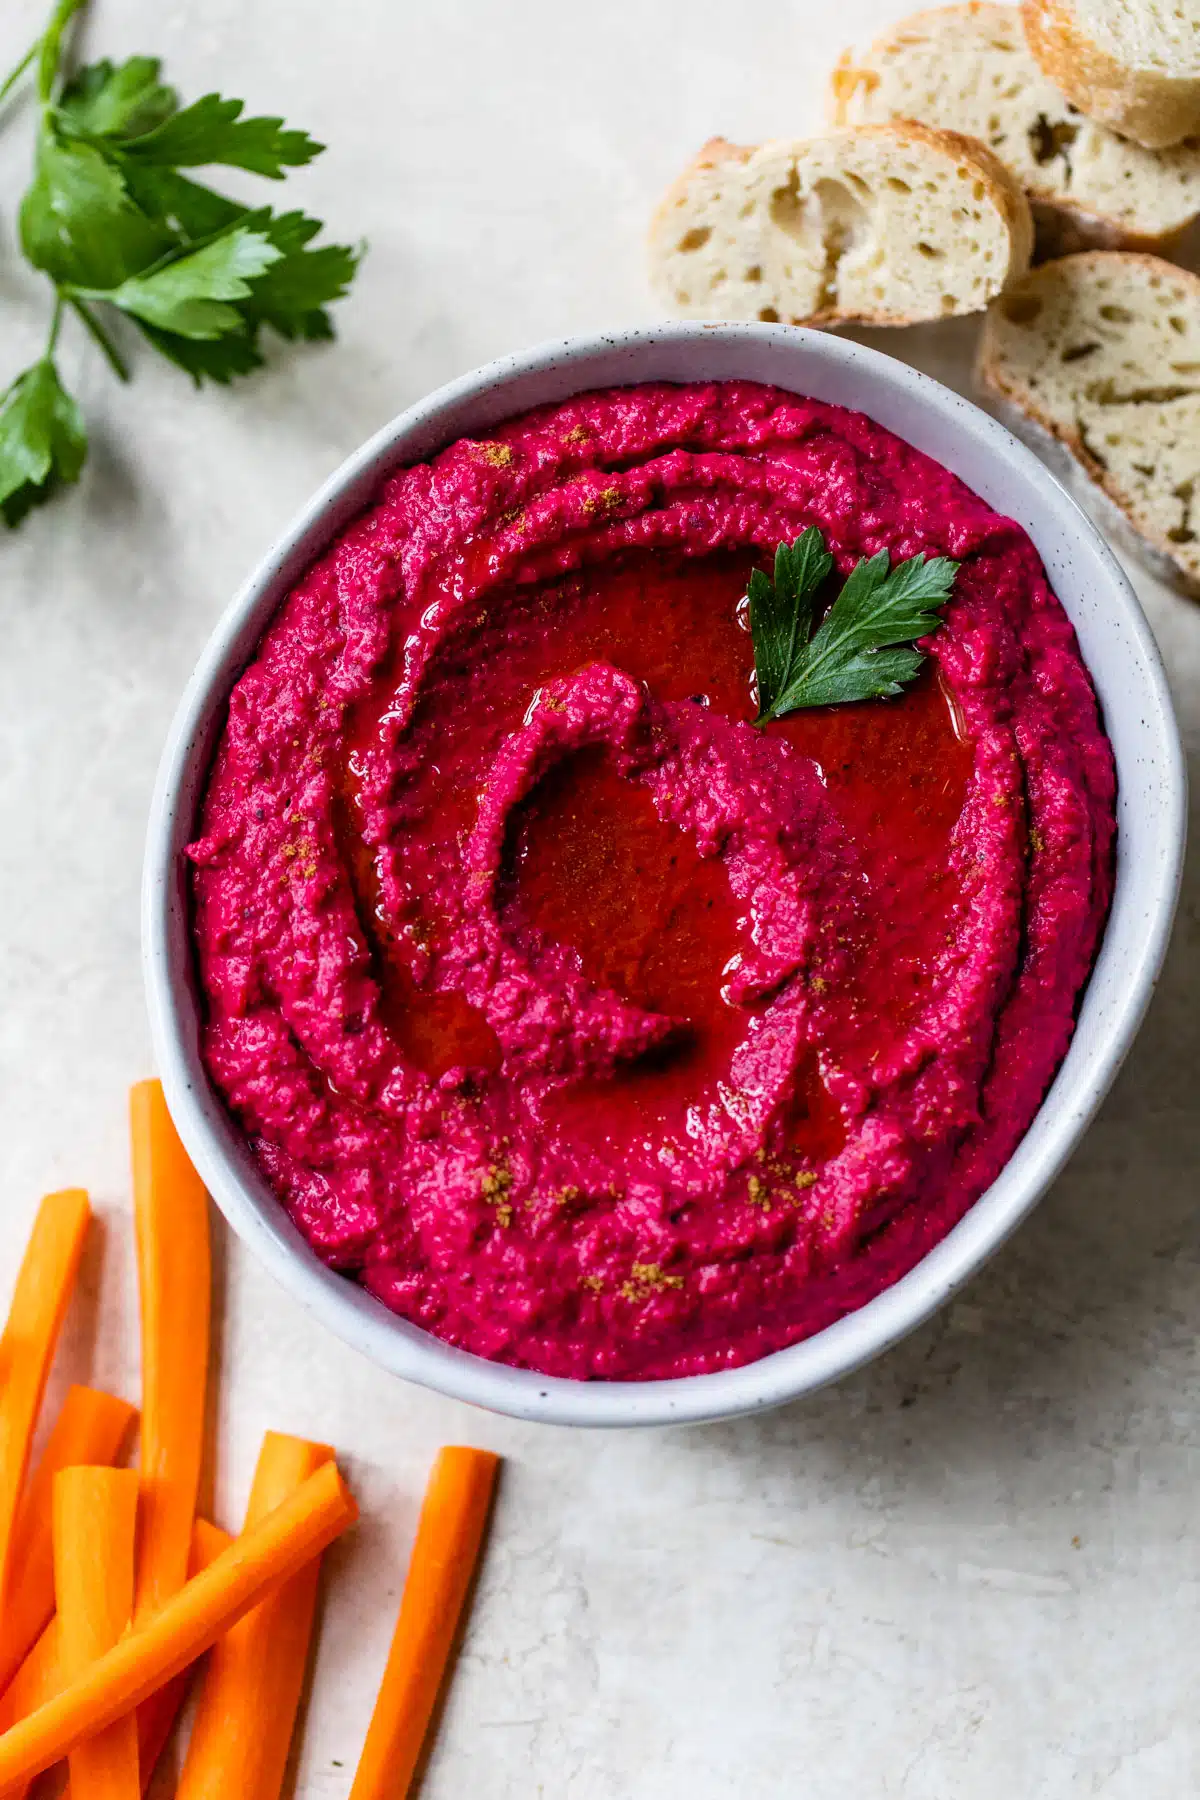 beet hummus in a bowl surrounded by slices of bread and carrots